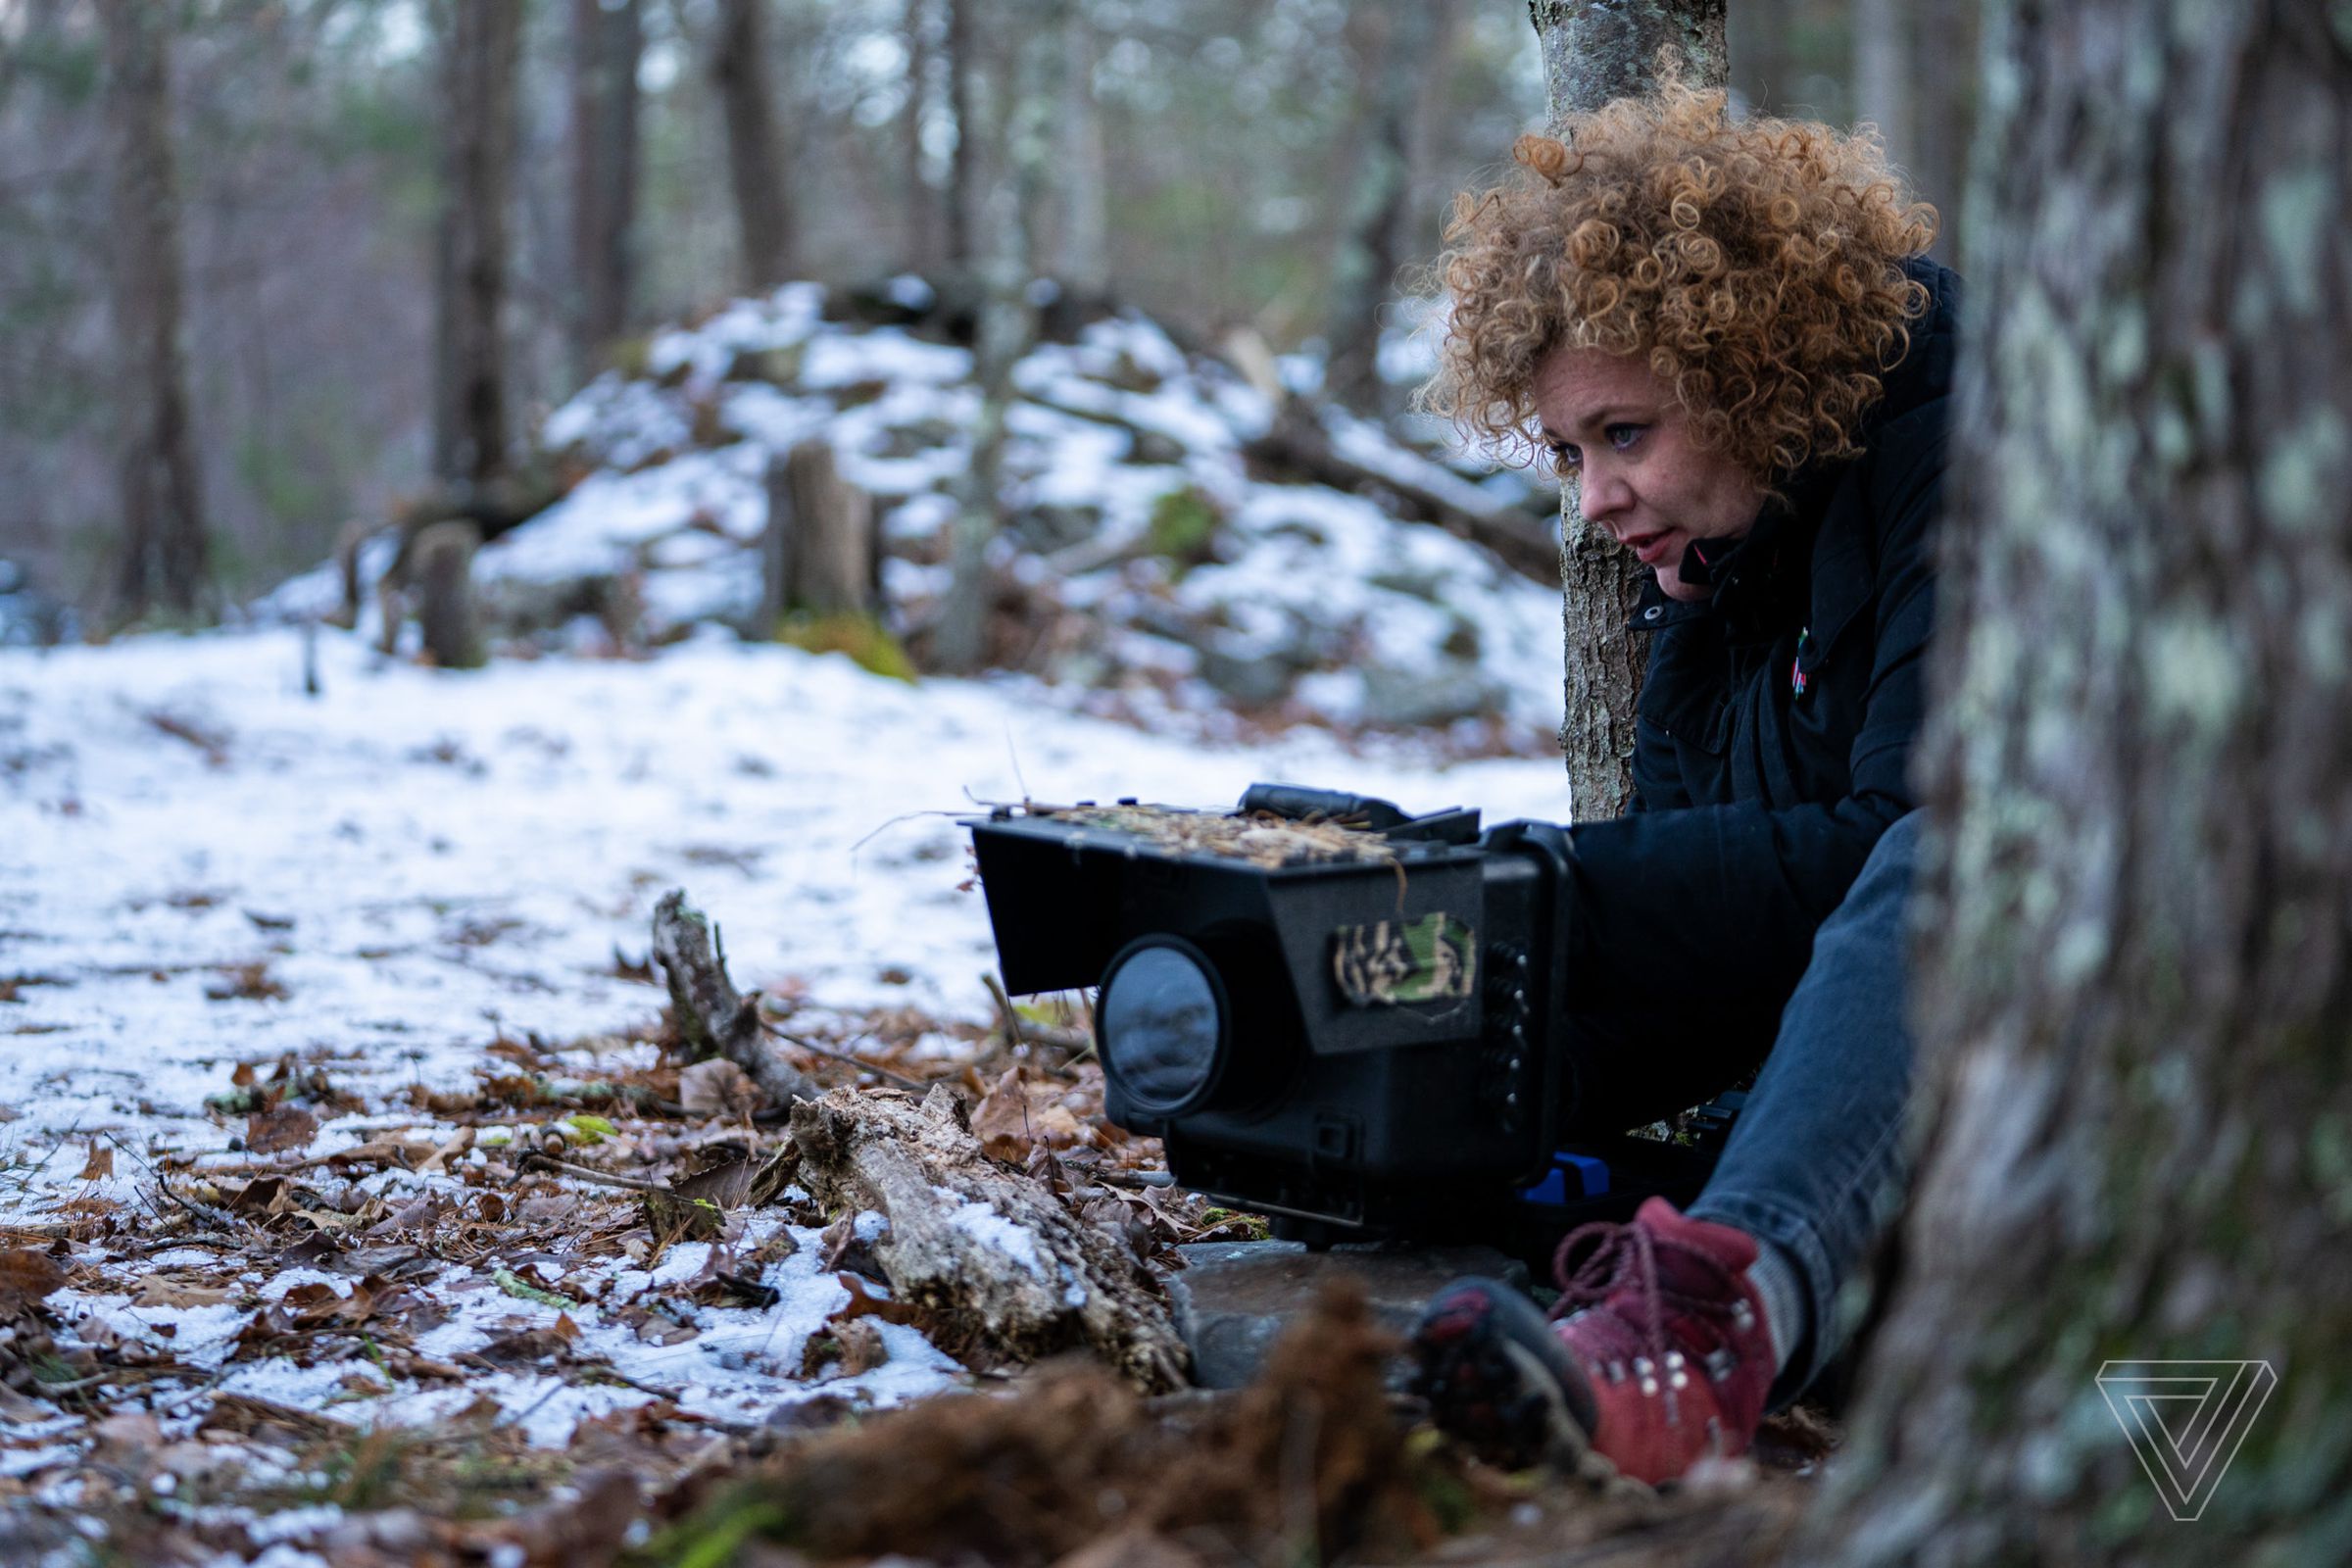 Carla Rhodes setting her camera trapping box.